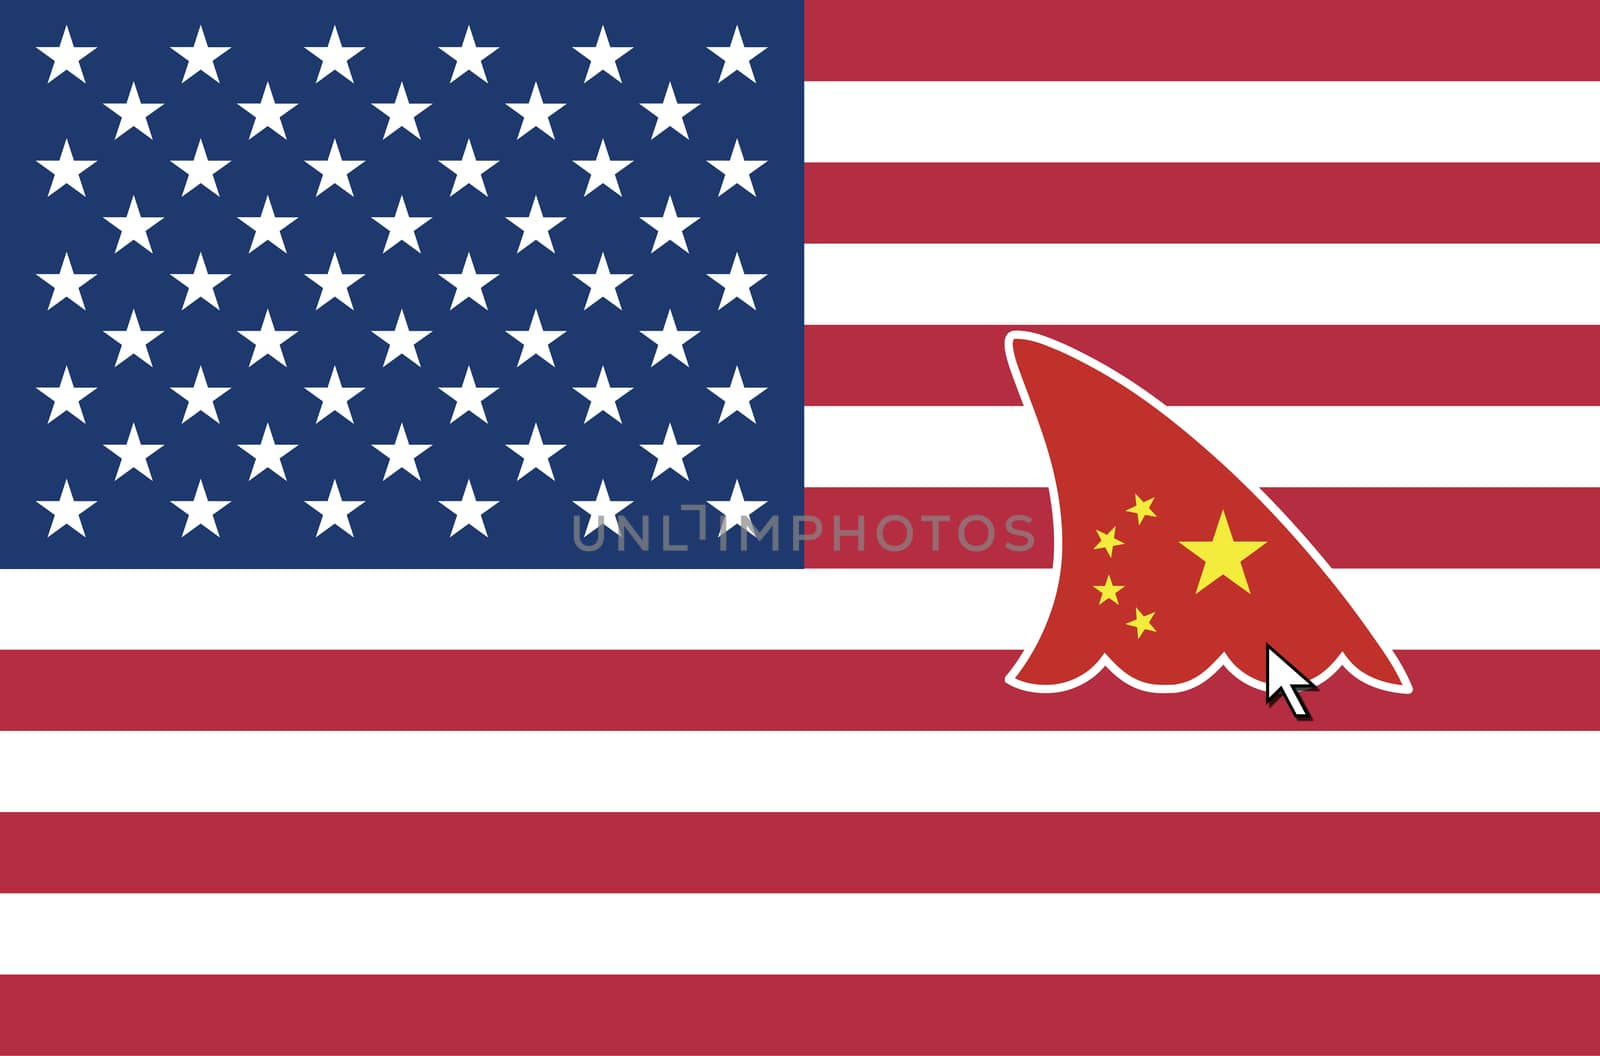 Concept sign for the Chinese espionage on the United States